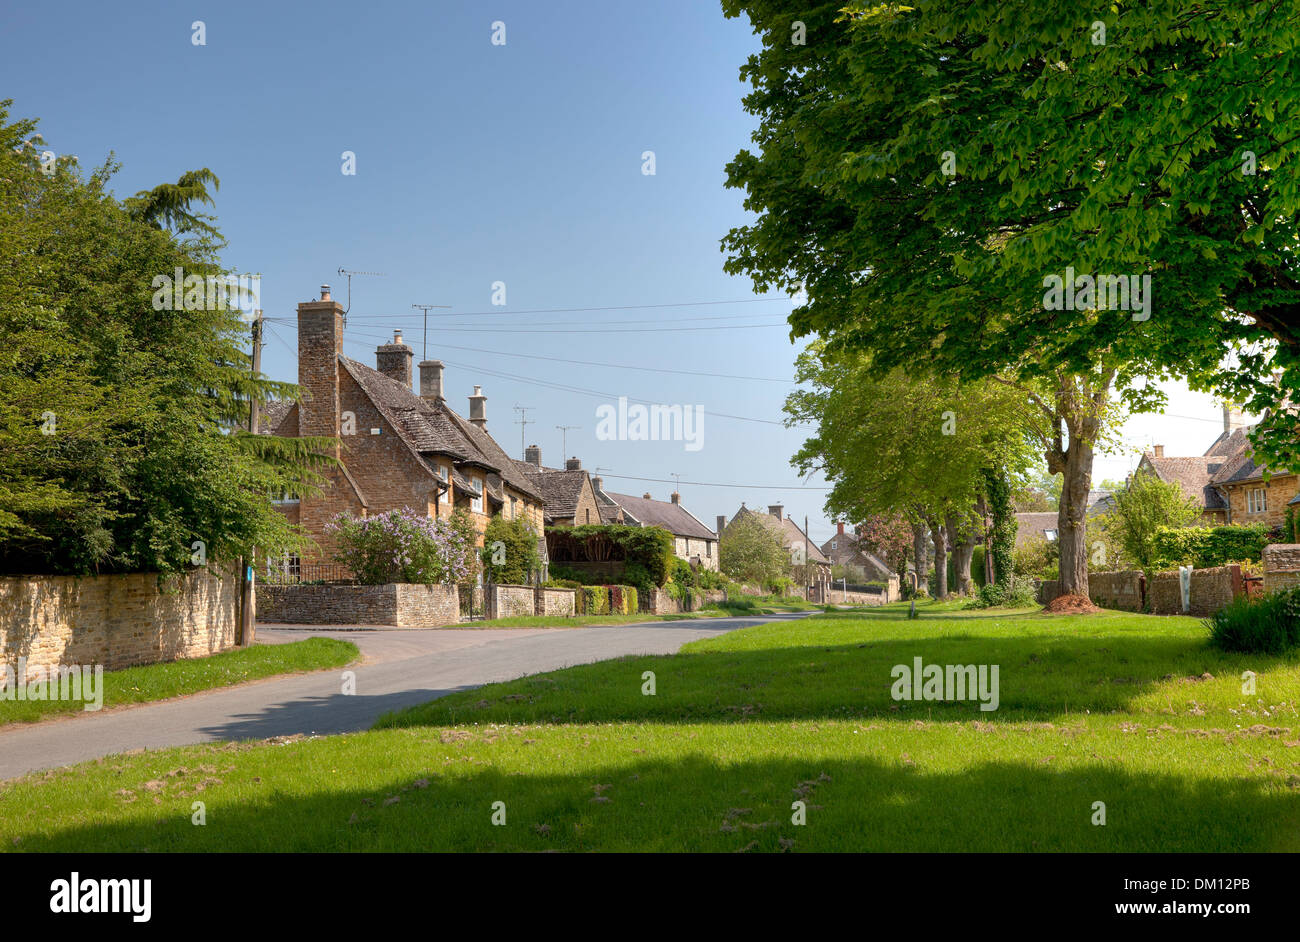 The Cotswold village of Kingham, Oxfordshire, England. Stock Photo